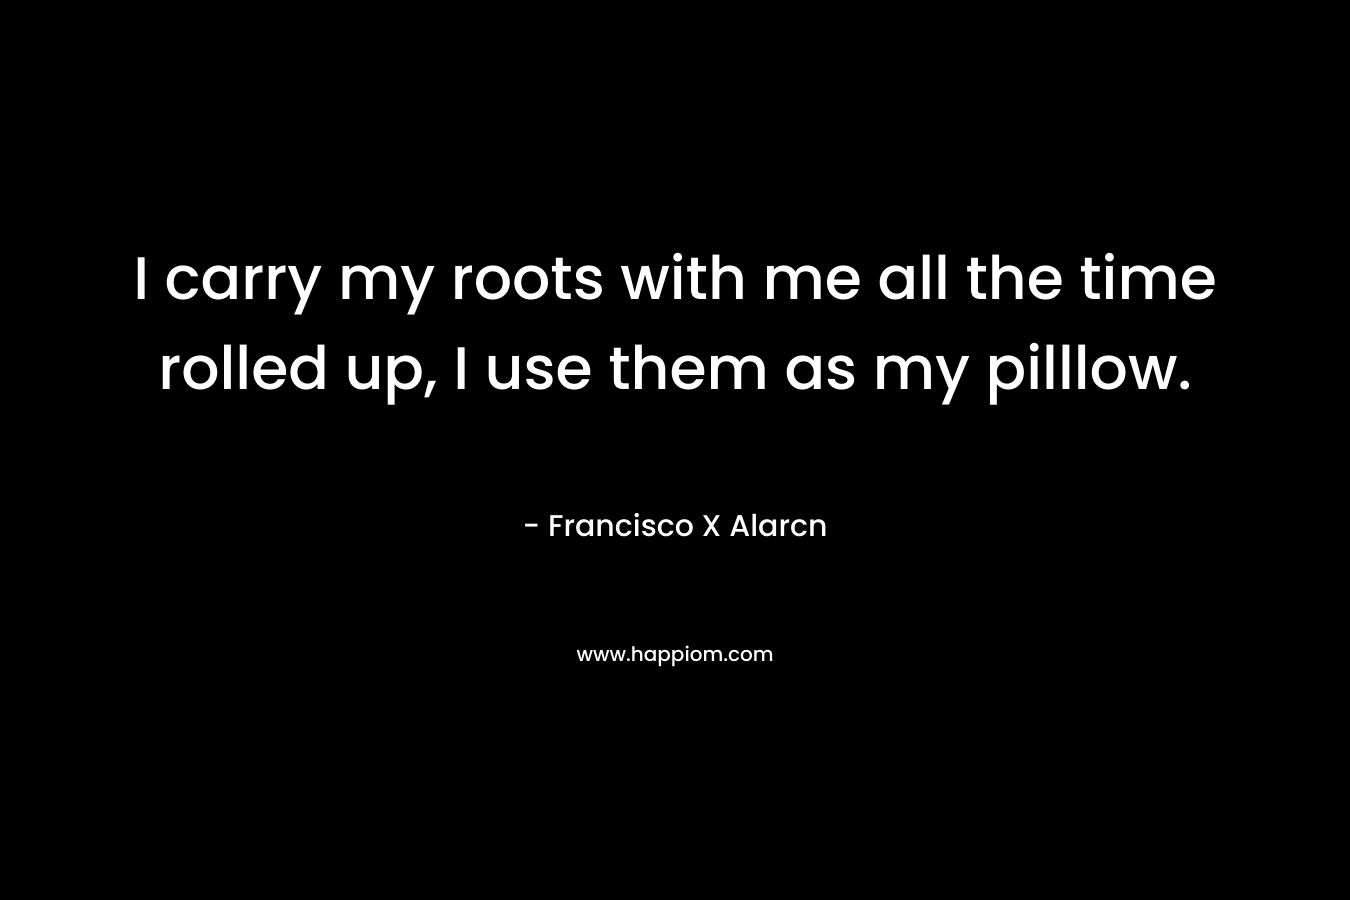 I carry my roots with me all the time rolled up, I use them as my pilllow. – Francisco X Alarcn